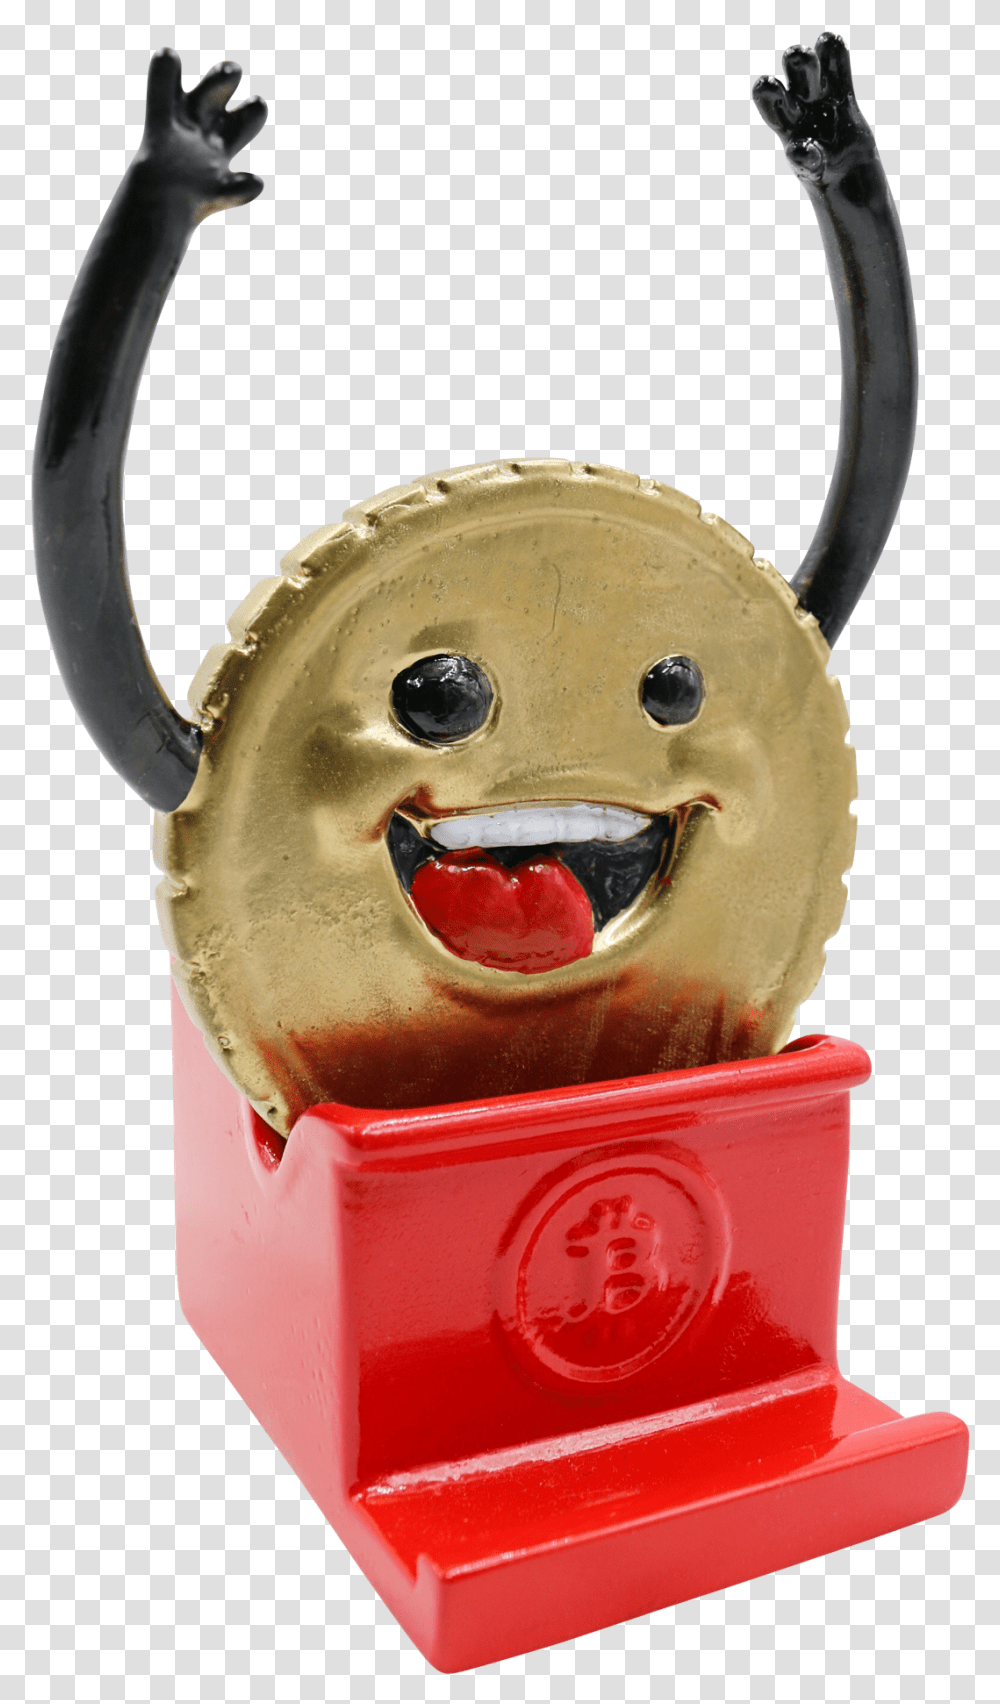 The Bitcoin Rollercoaster Guy Stuffed Toy, Pottery, Food, Fire Hydrant, Jar Transparent Png